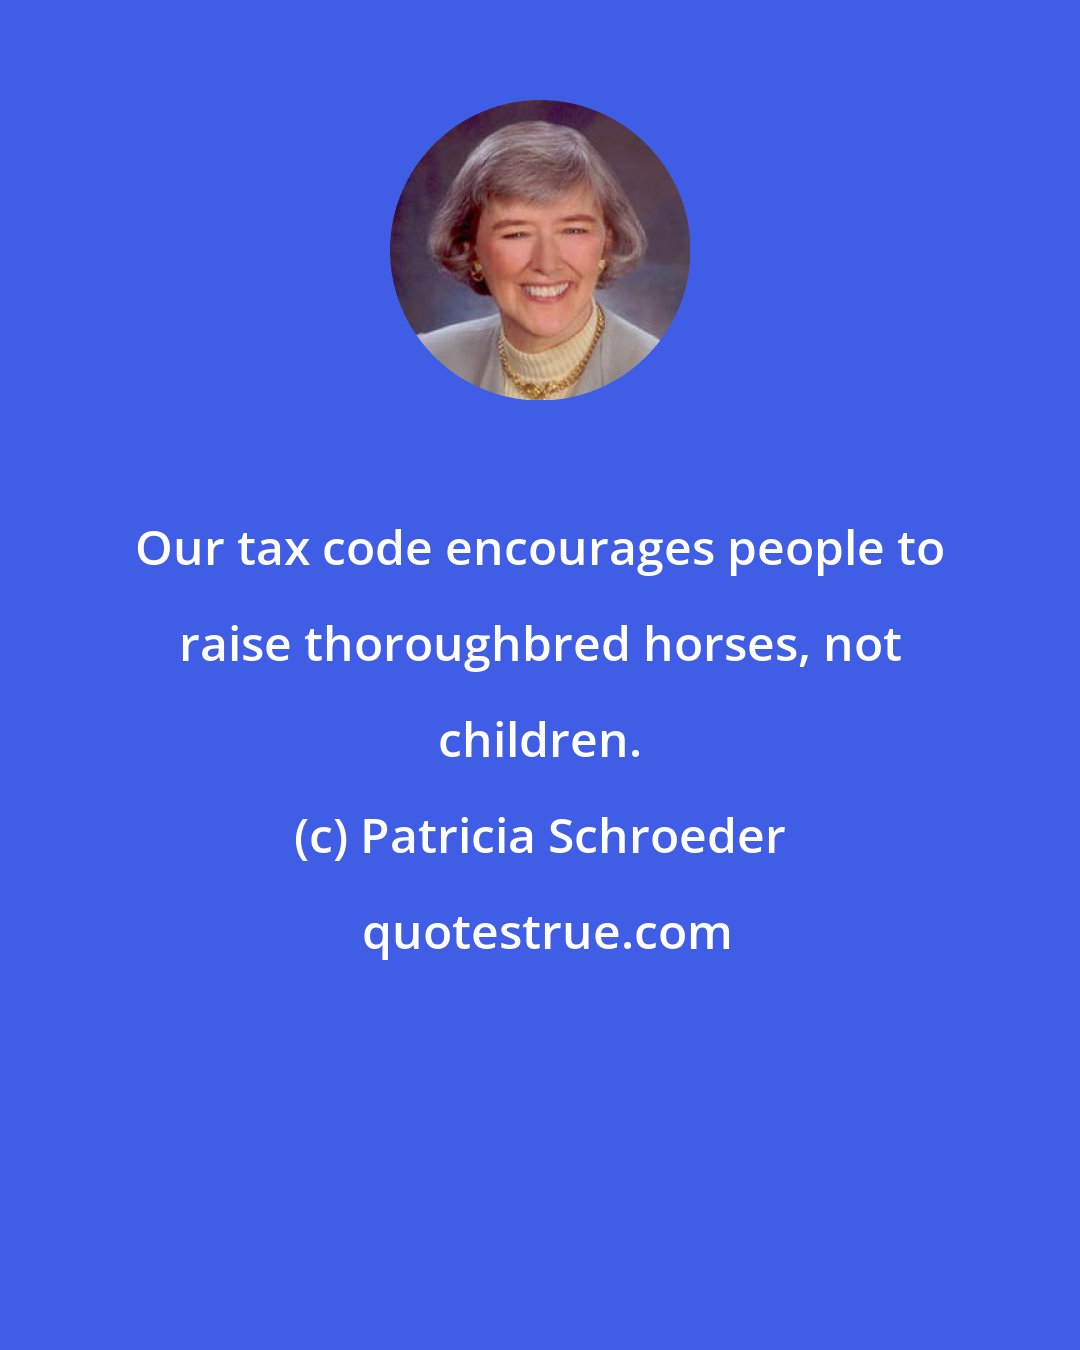 Patricia Schroeder: Our tax code encourages people to raise thoroughbred horses, not children.